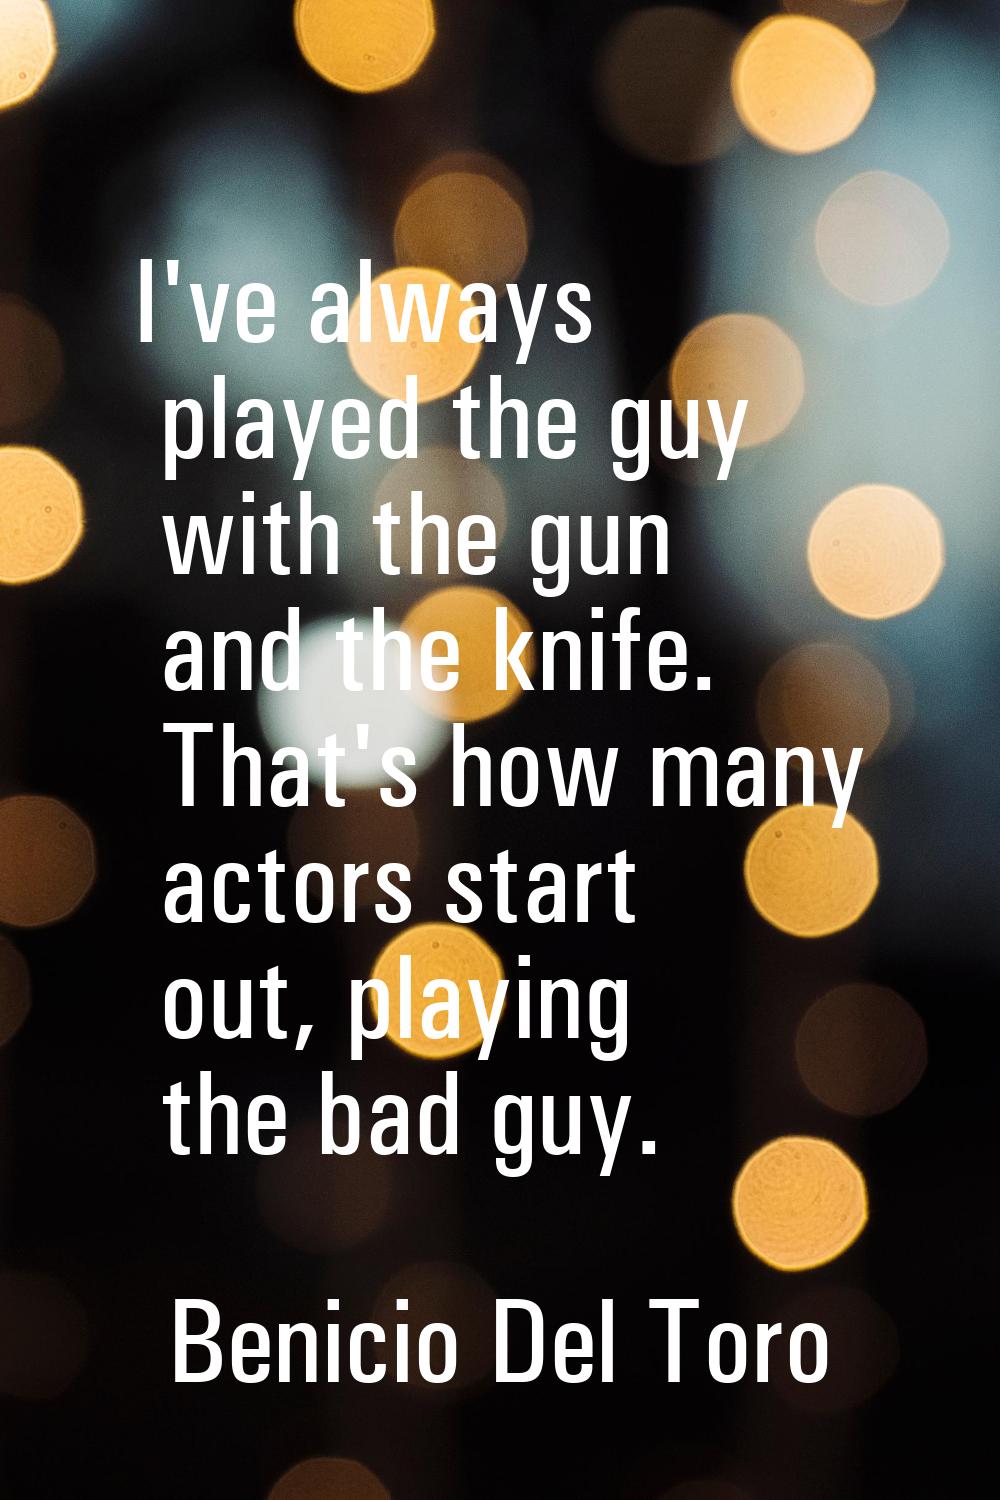 I've always played the guy with the gun and the knife. That's how many actors start out, playing th